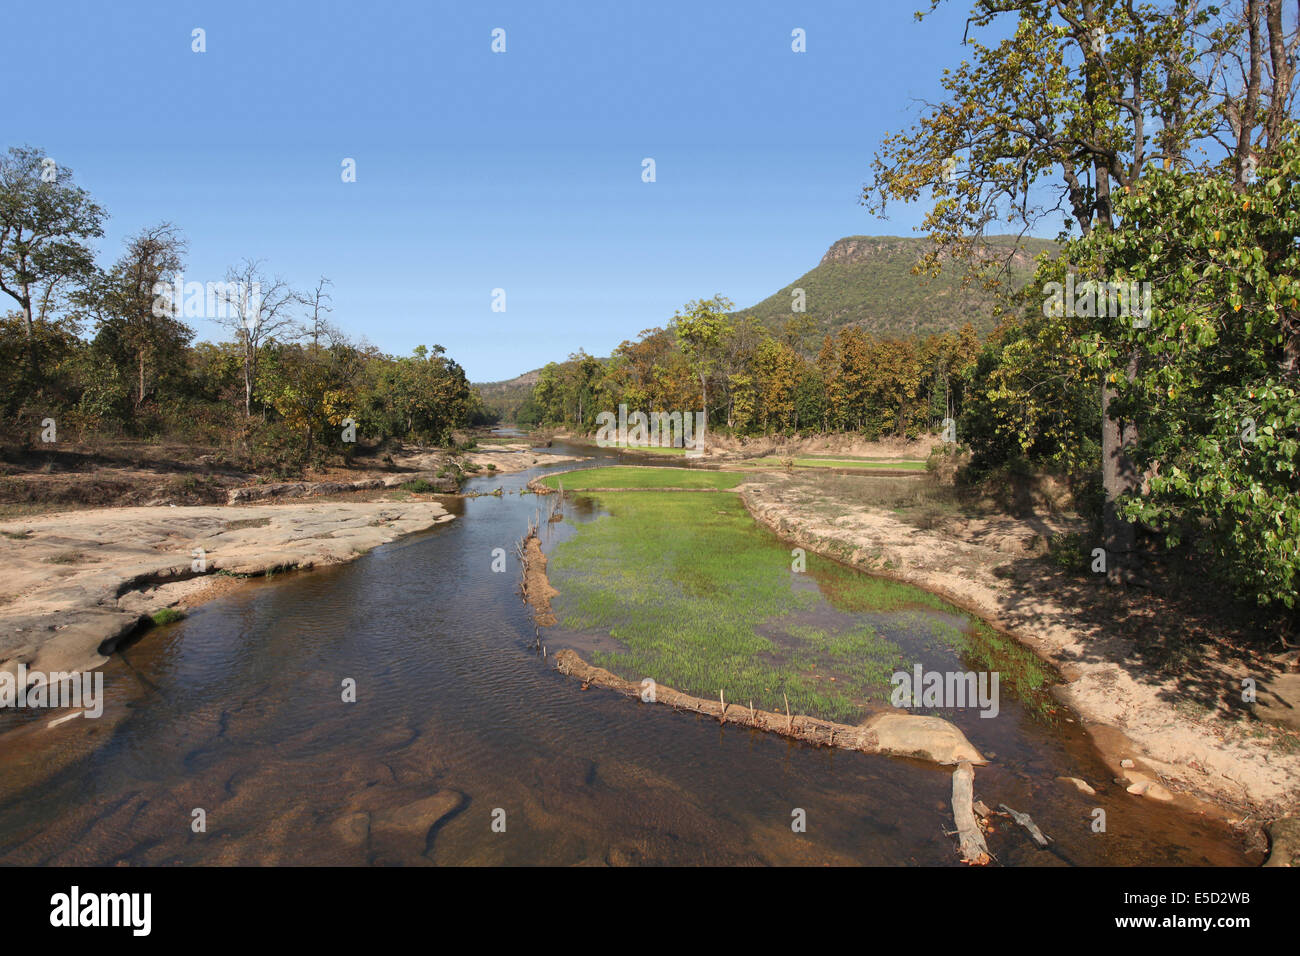 Landscape with still water and mountain, Chattisgadh, India Stock Photo